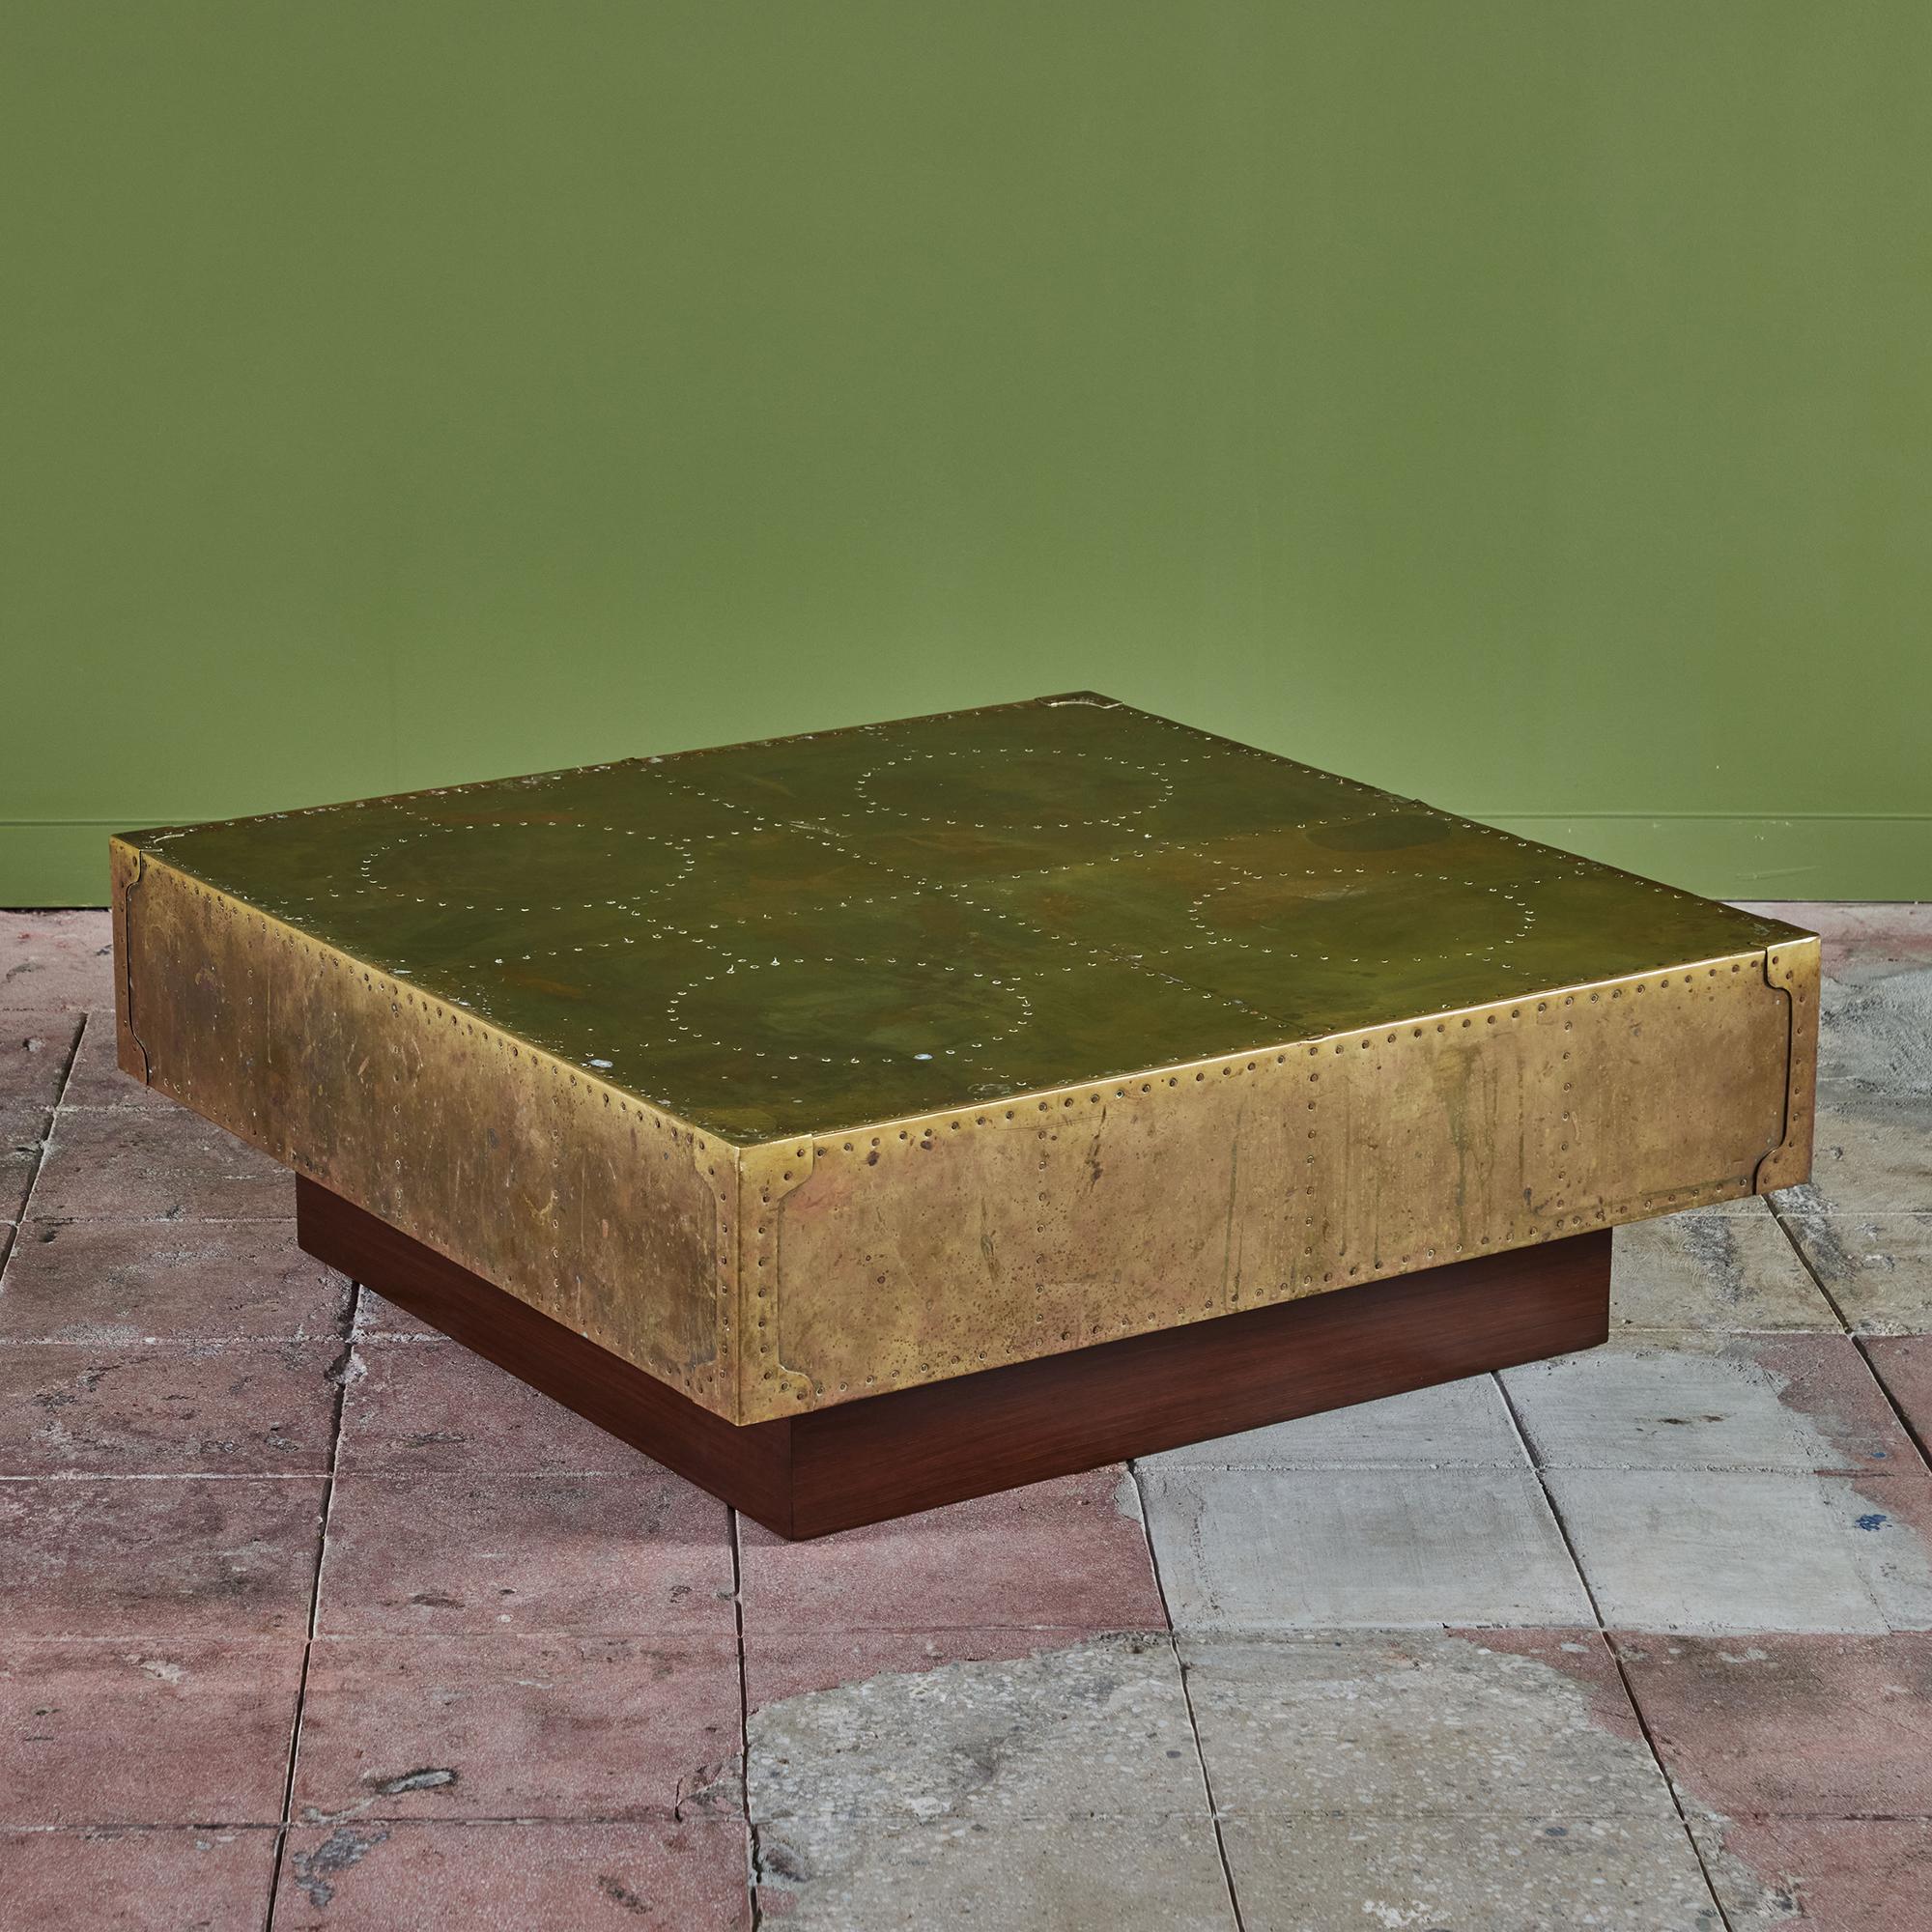 Square brass clad coffee table on a walnut plinth base in the style of Sarreid. The table has a brass riveted detailing. The table top features a geometric pattern of squares and circles showcased by the rivets. The brass sheets that make up this